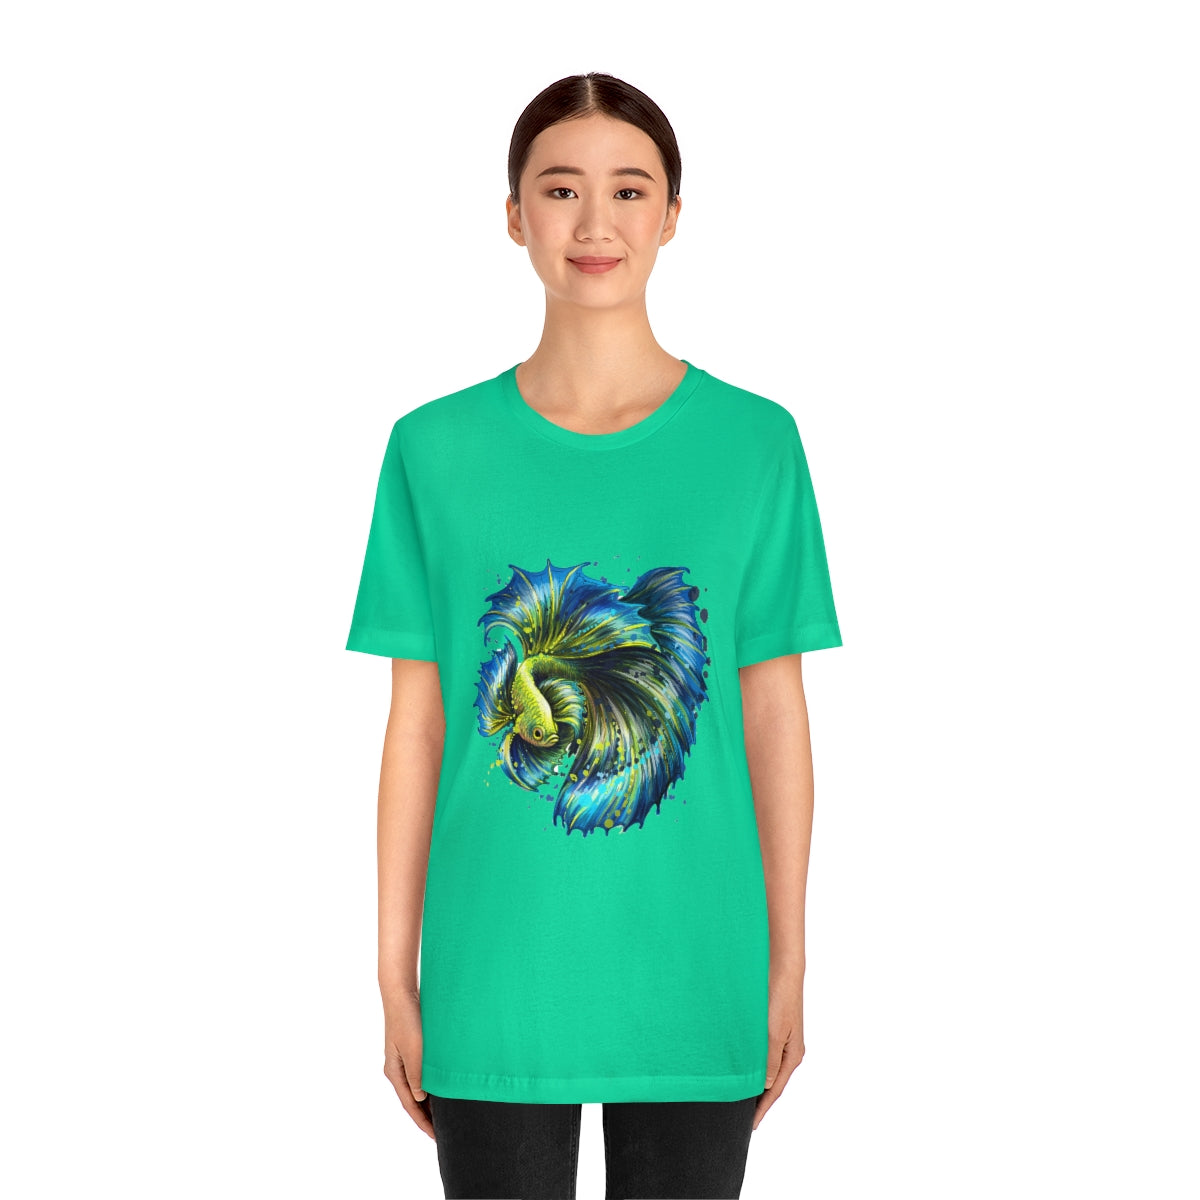 Unisex Jersey Short Sleeve Tee "Colorful tropical fish"